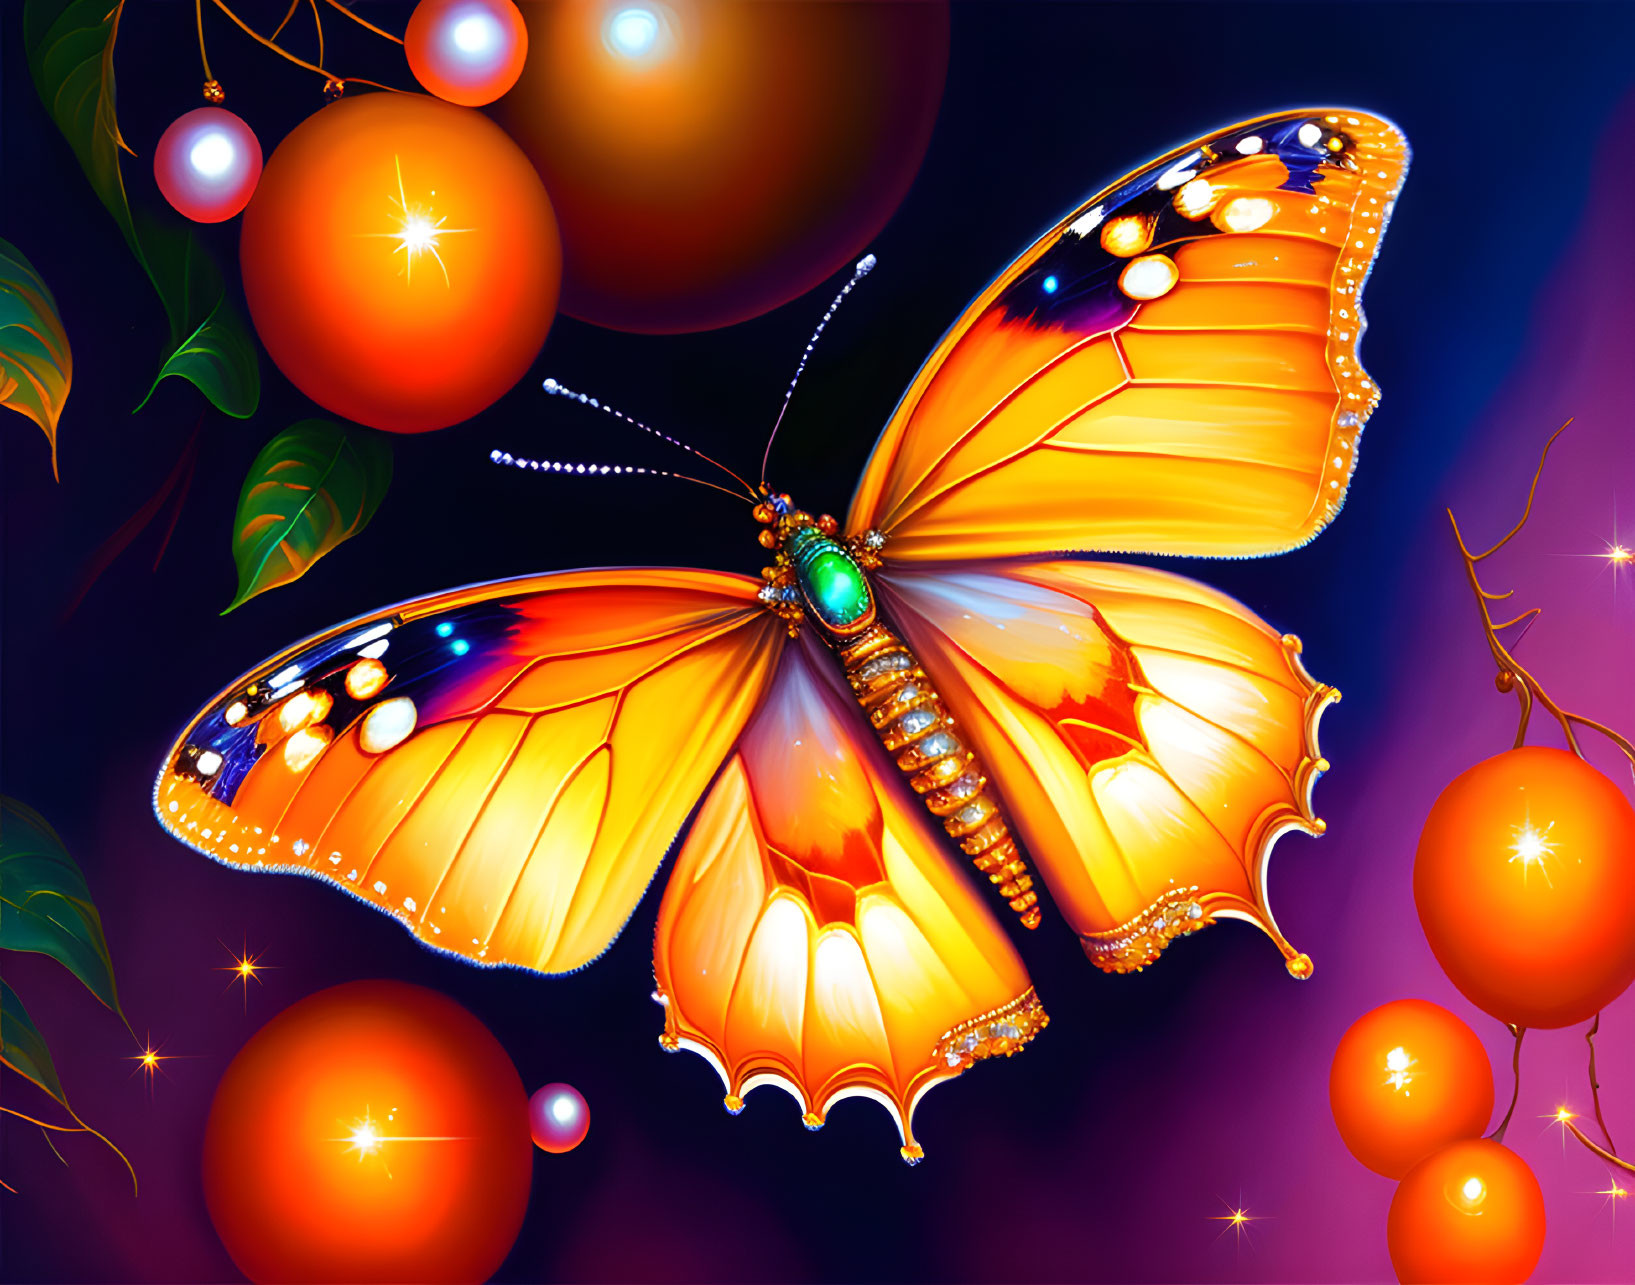 Colorful Butterfly Illustration with Decorative Patterns and Berries on Purple Background